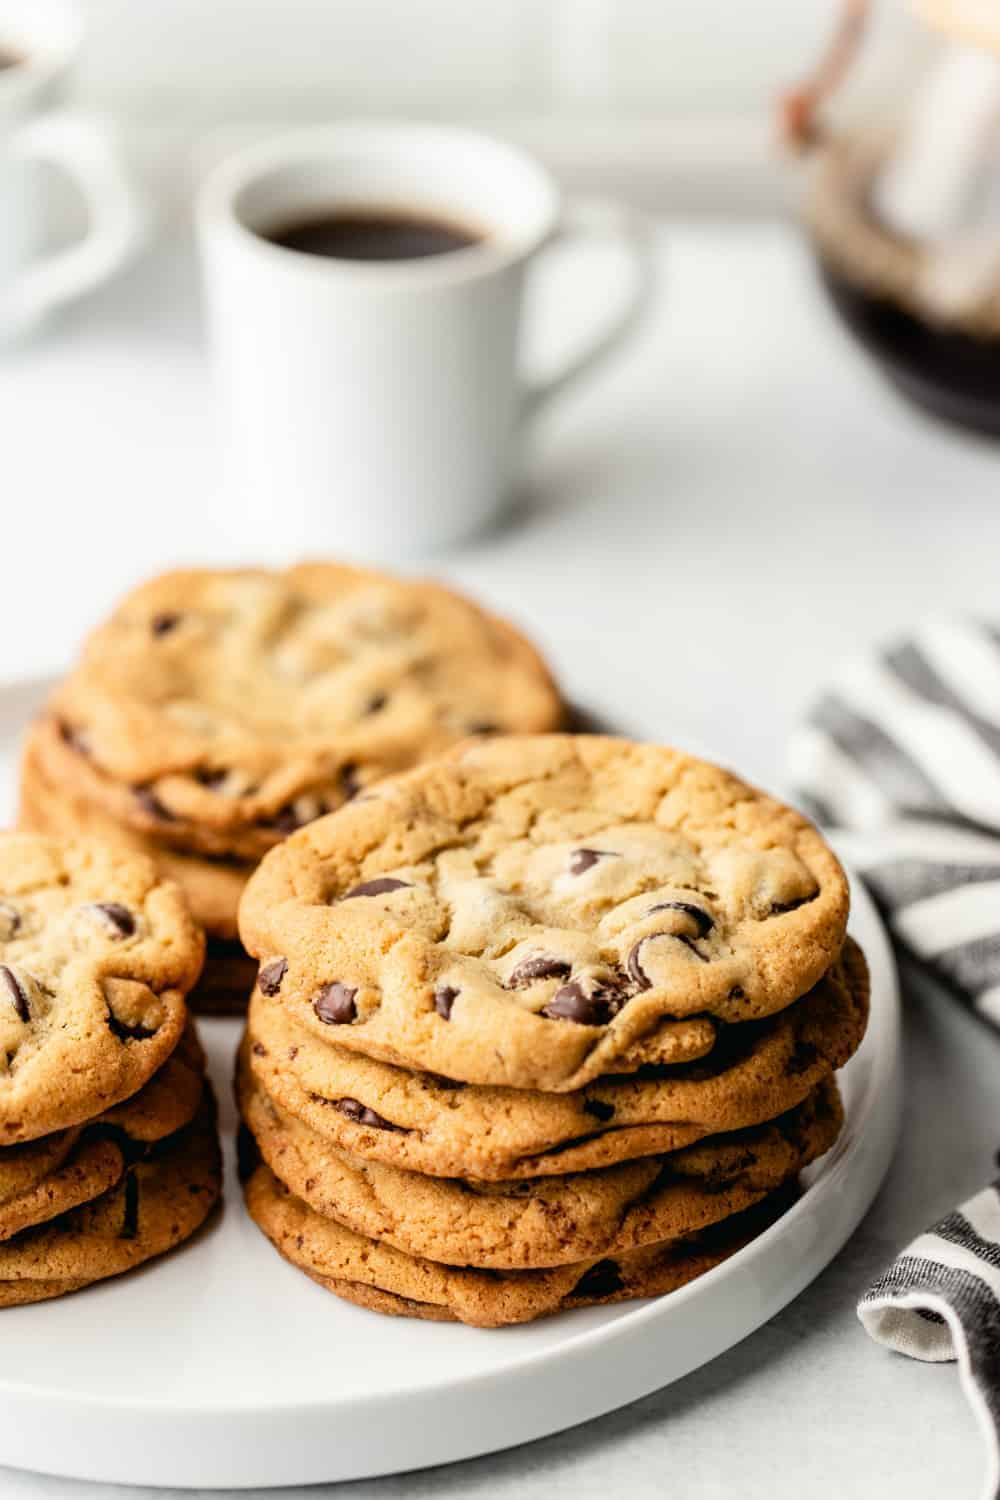 Chocolate chip cookies that are huge, chewy, and perfectly delicious are within your grasp with the New York Times chocolate chip cookie recipe